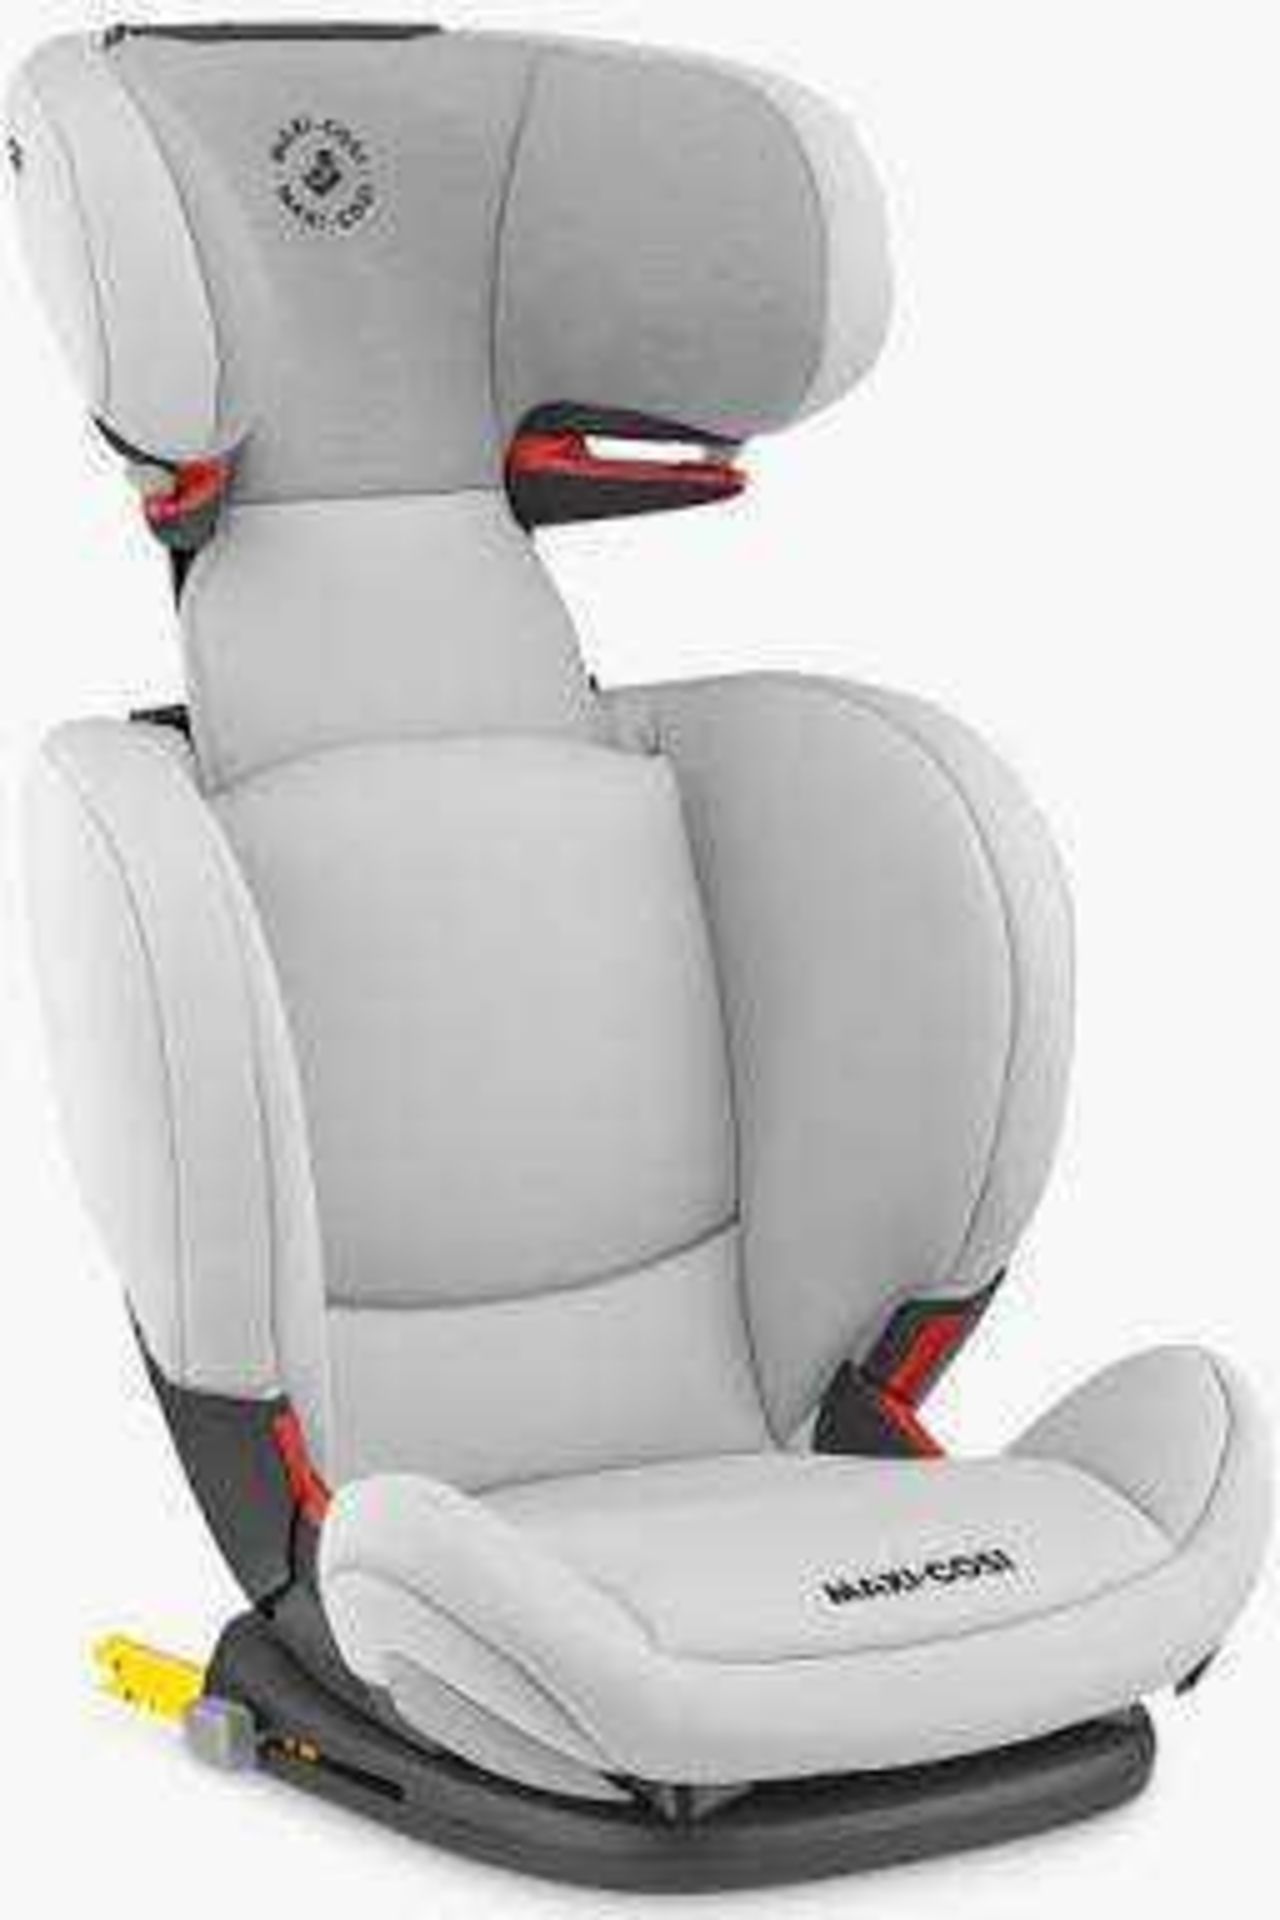 RRP £150 Unboxed Maxi Cosi Rodifix Air Protect Isofix Group 2/3 Child Car Seat In Grey And Red